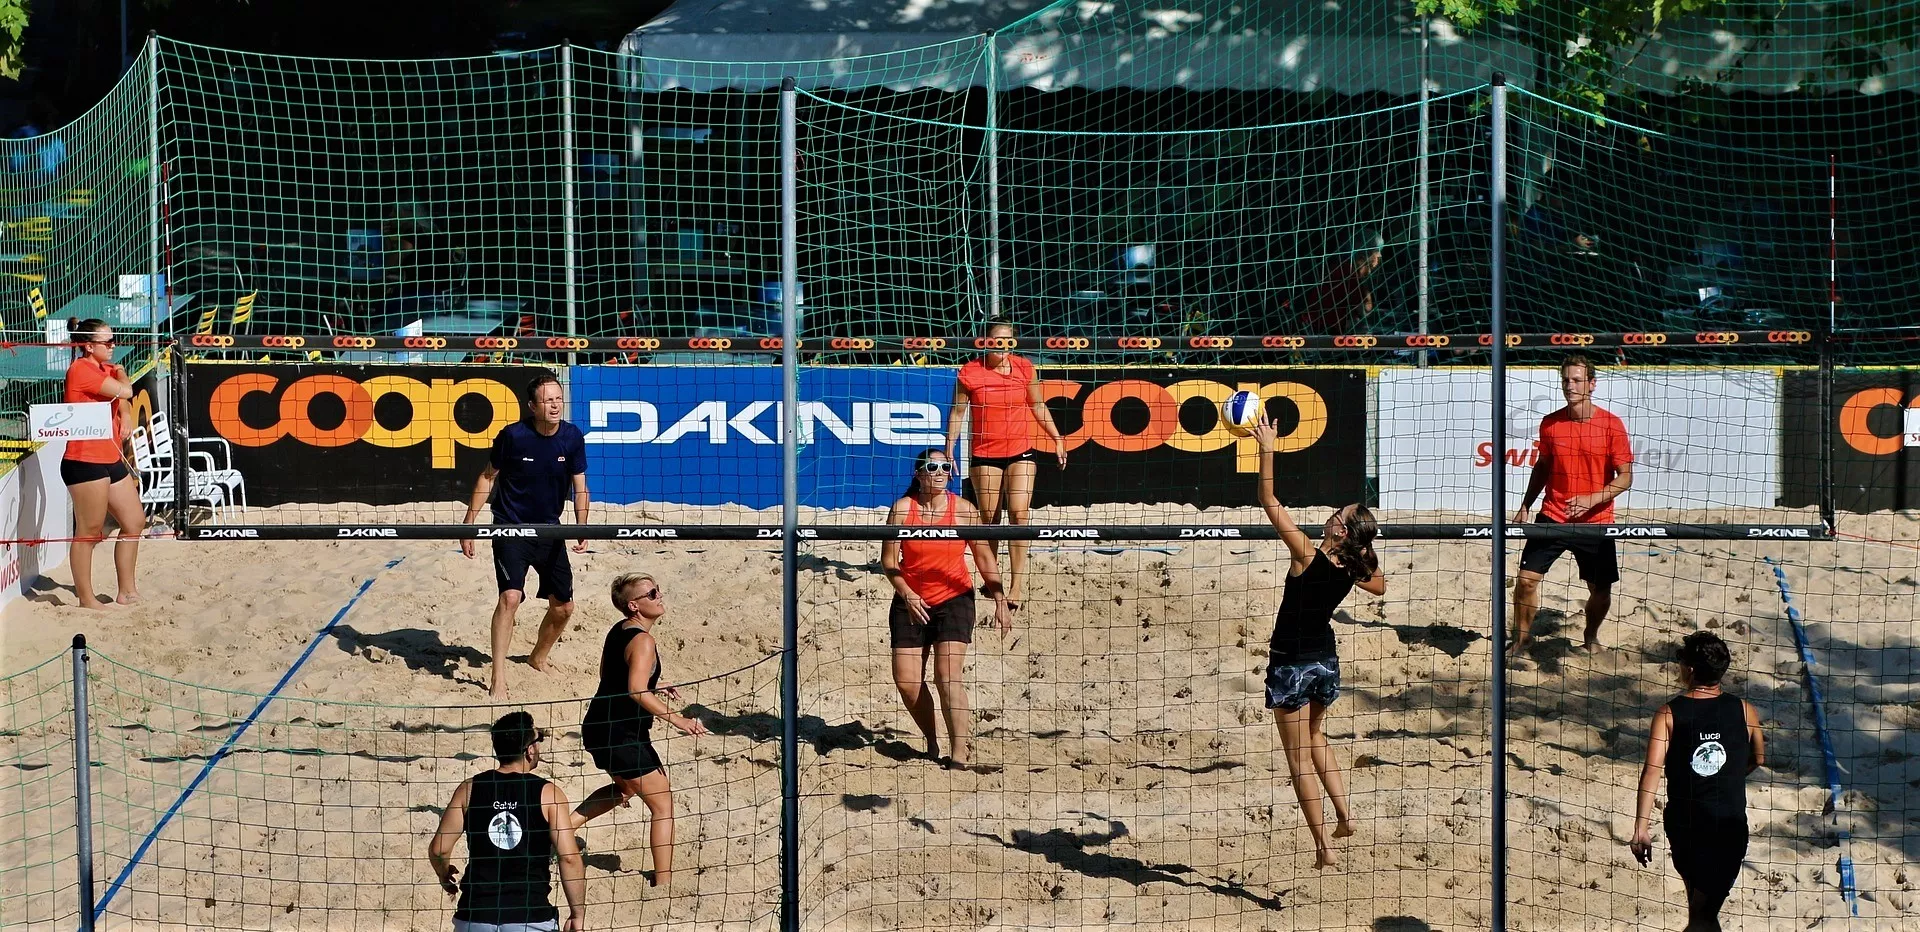 Harbour Beach Volleyball Centre in New Zealand, Australia and Oceania | Volleyball - Rated 0.8